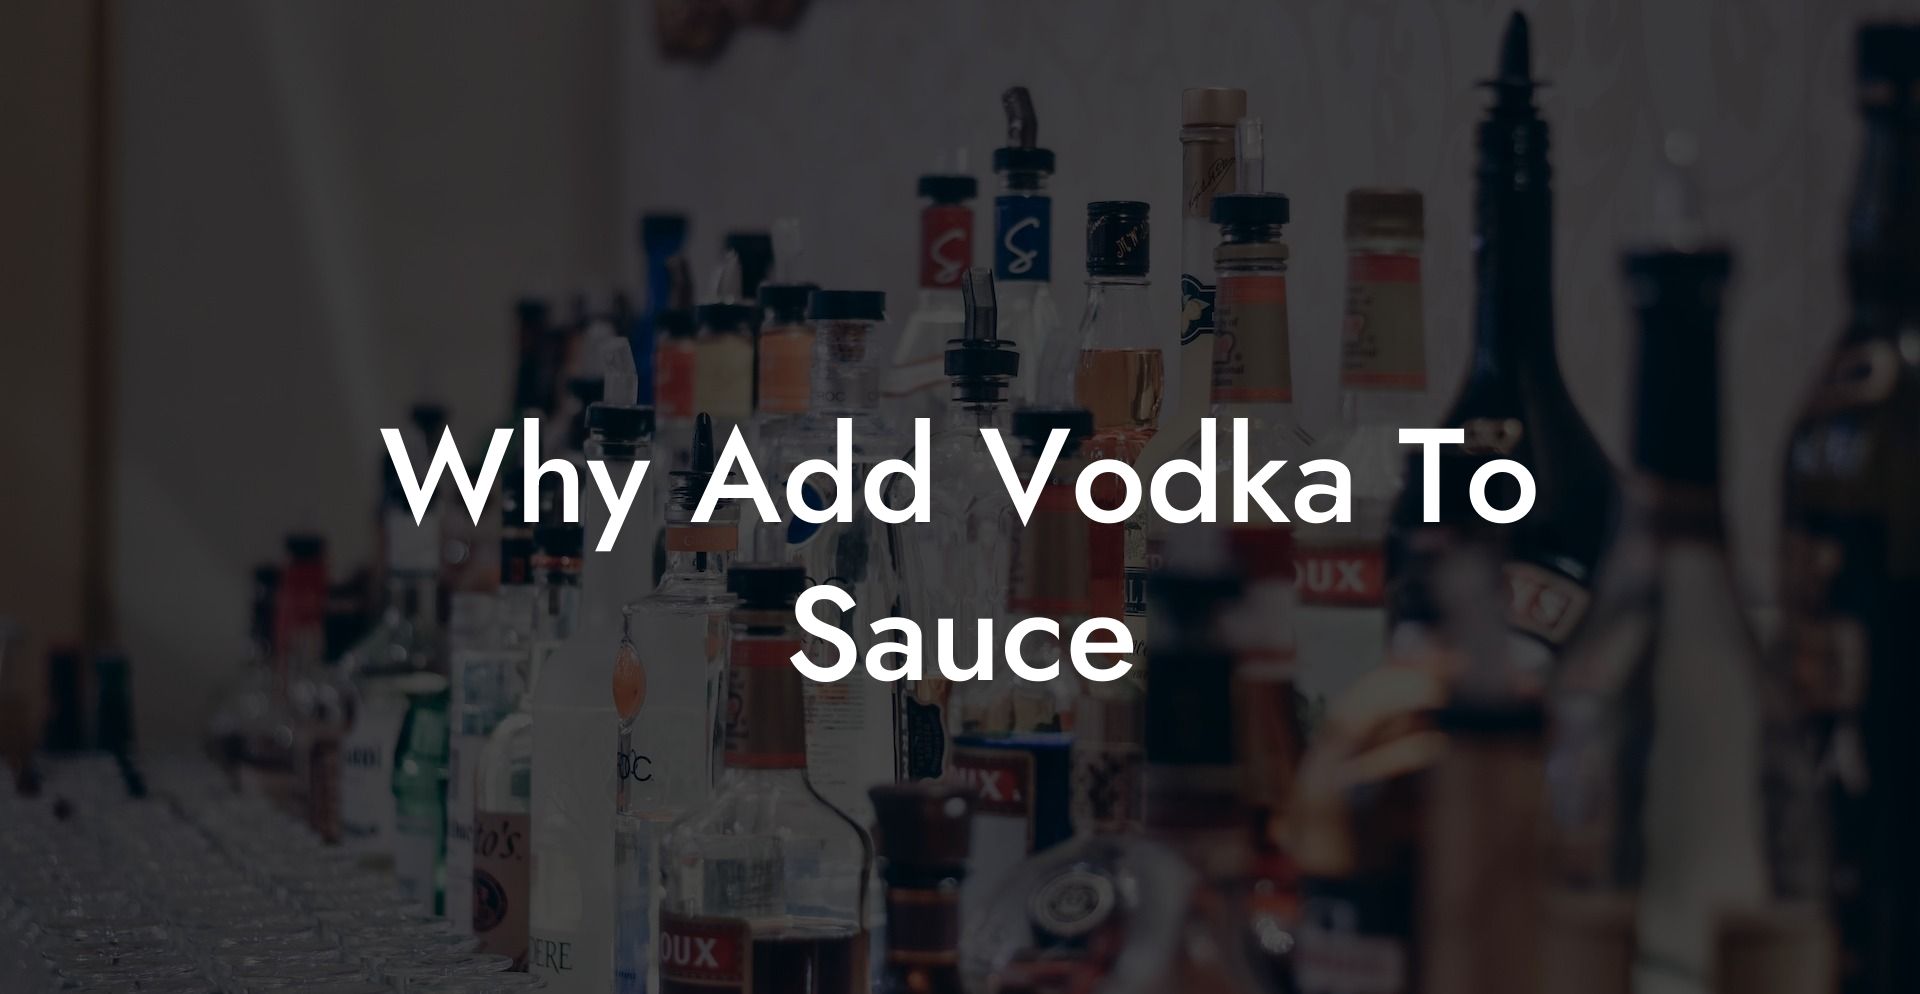 Why Add Vodka To Sauce